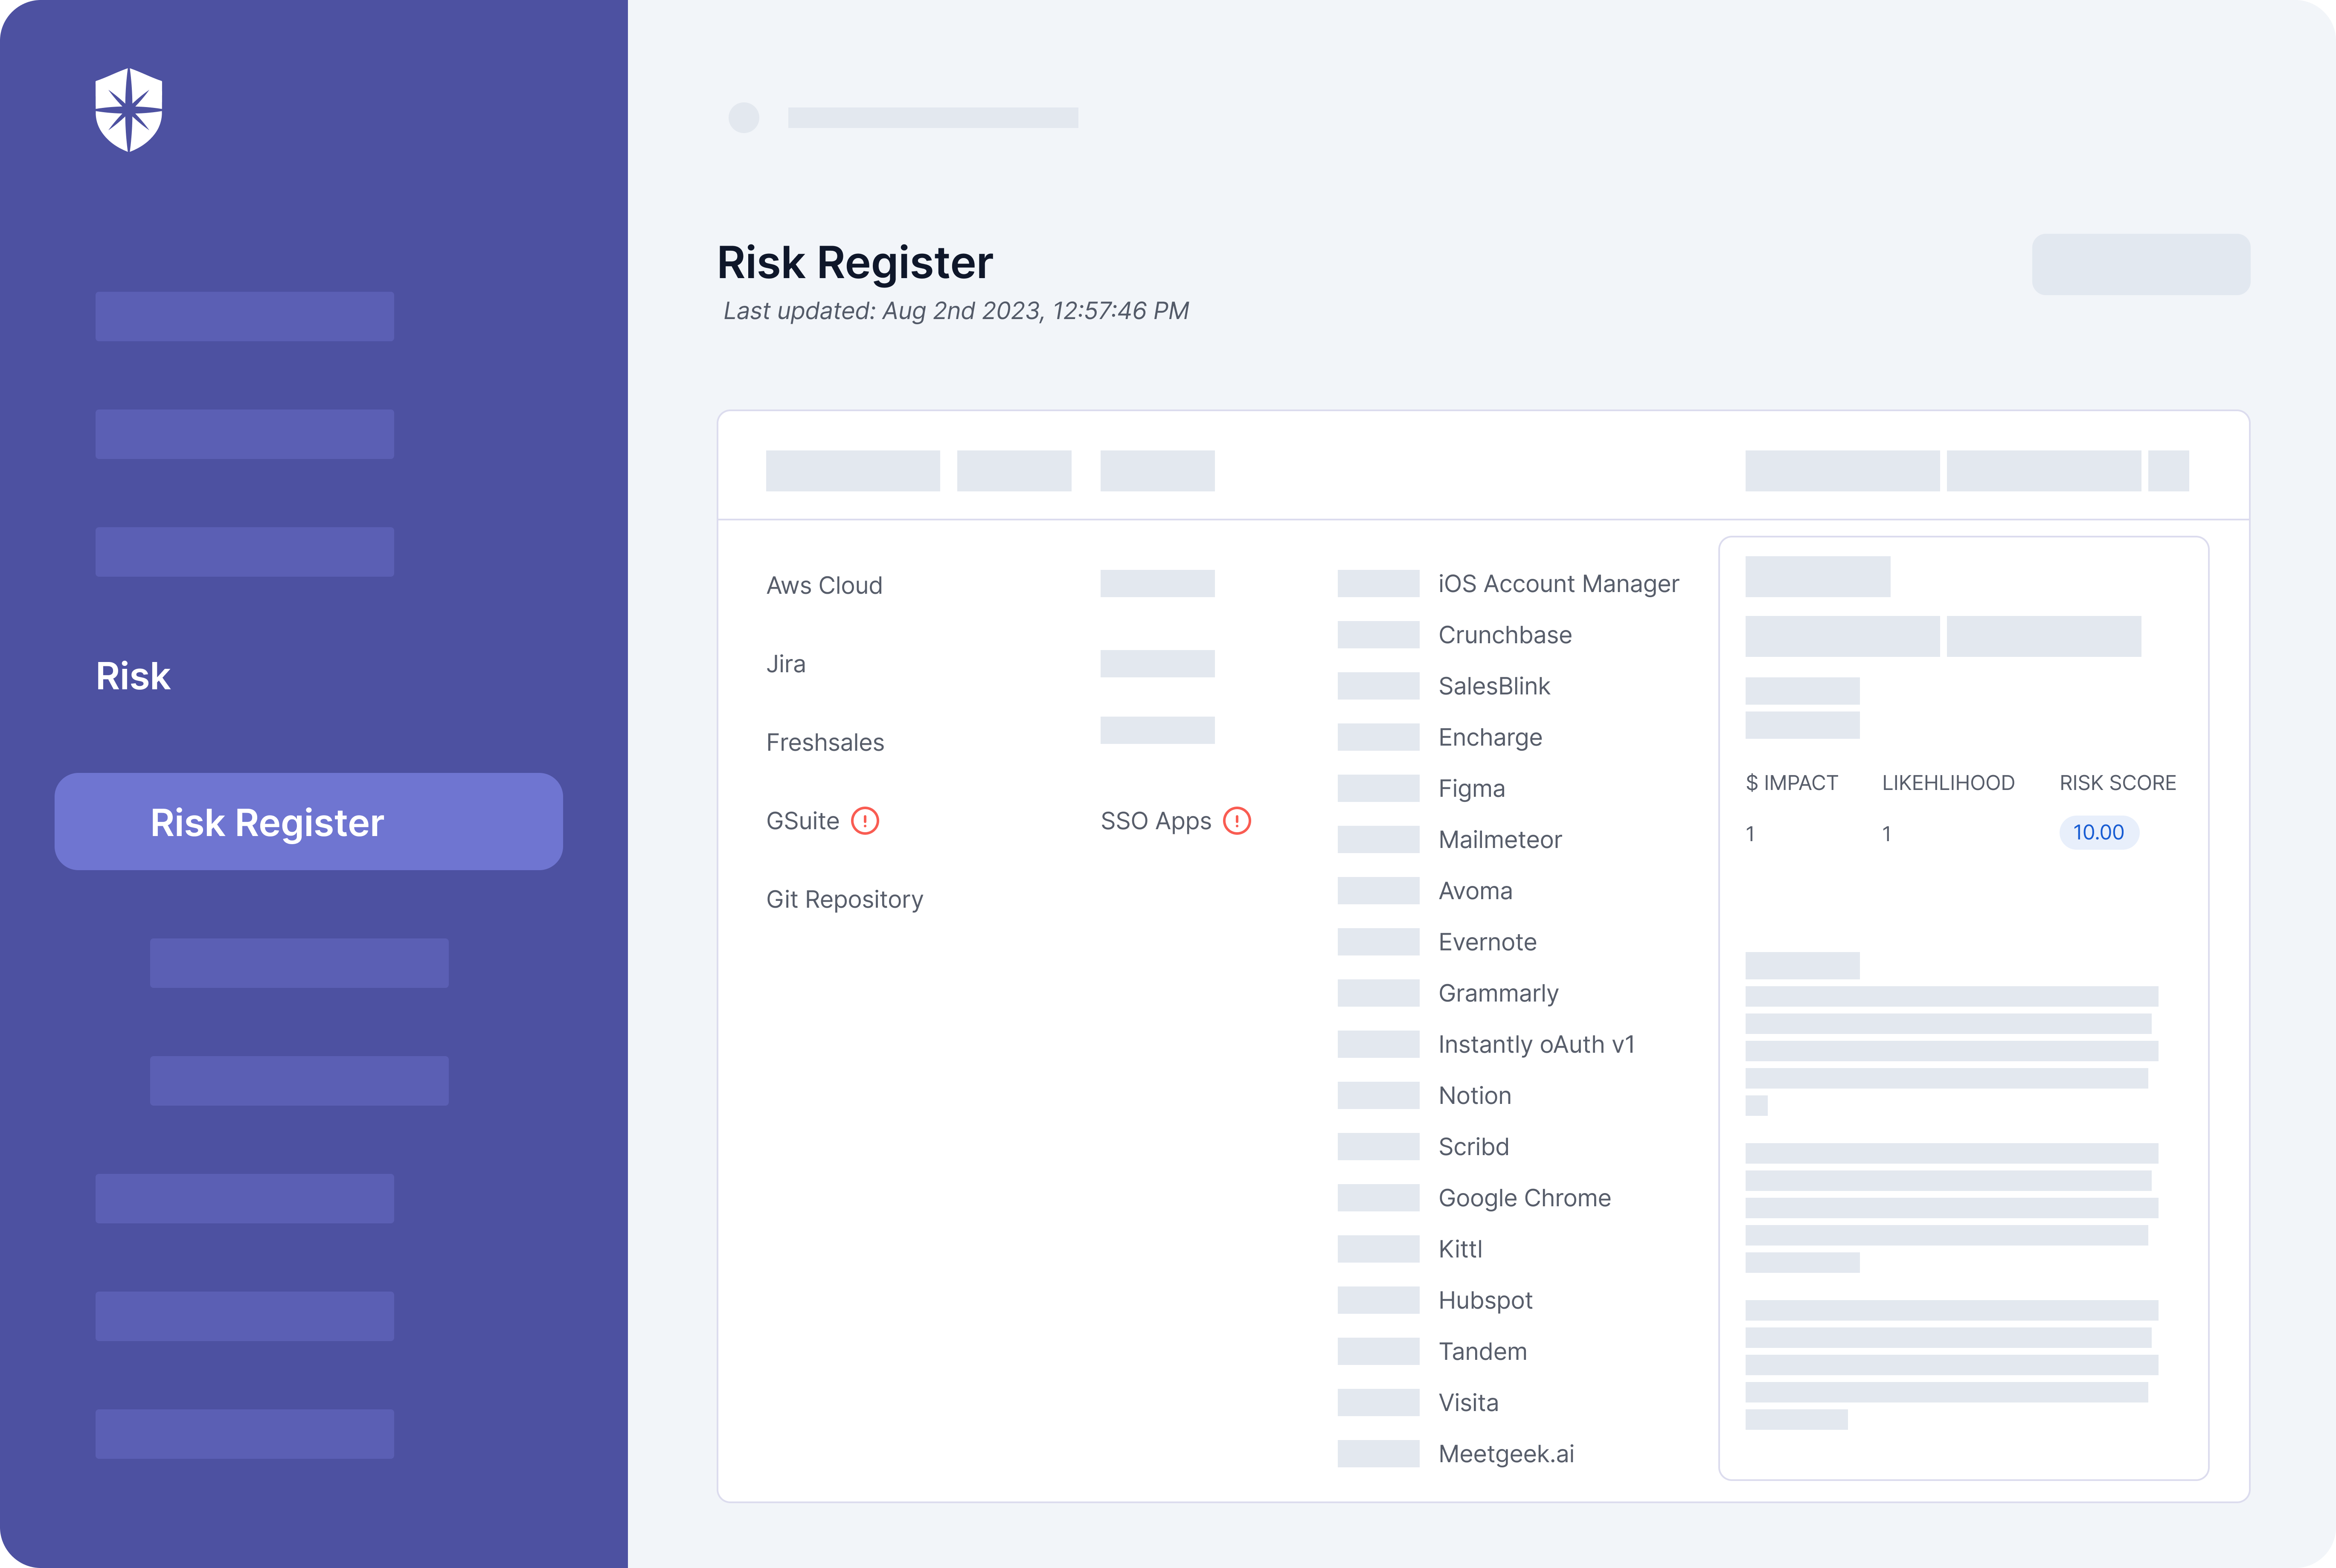 our Risk Register detected threats in a GSuite asset category down to individual users